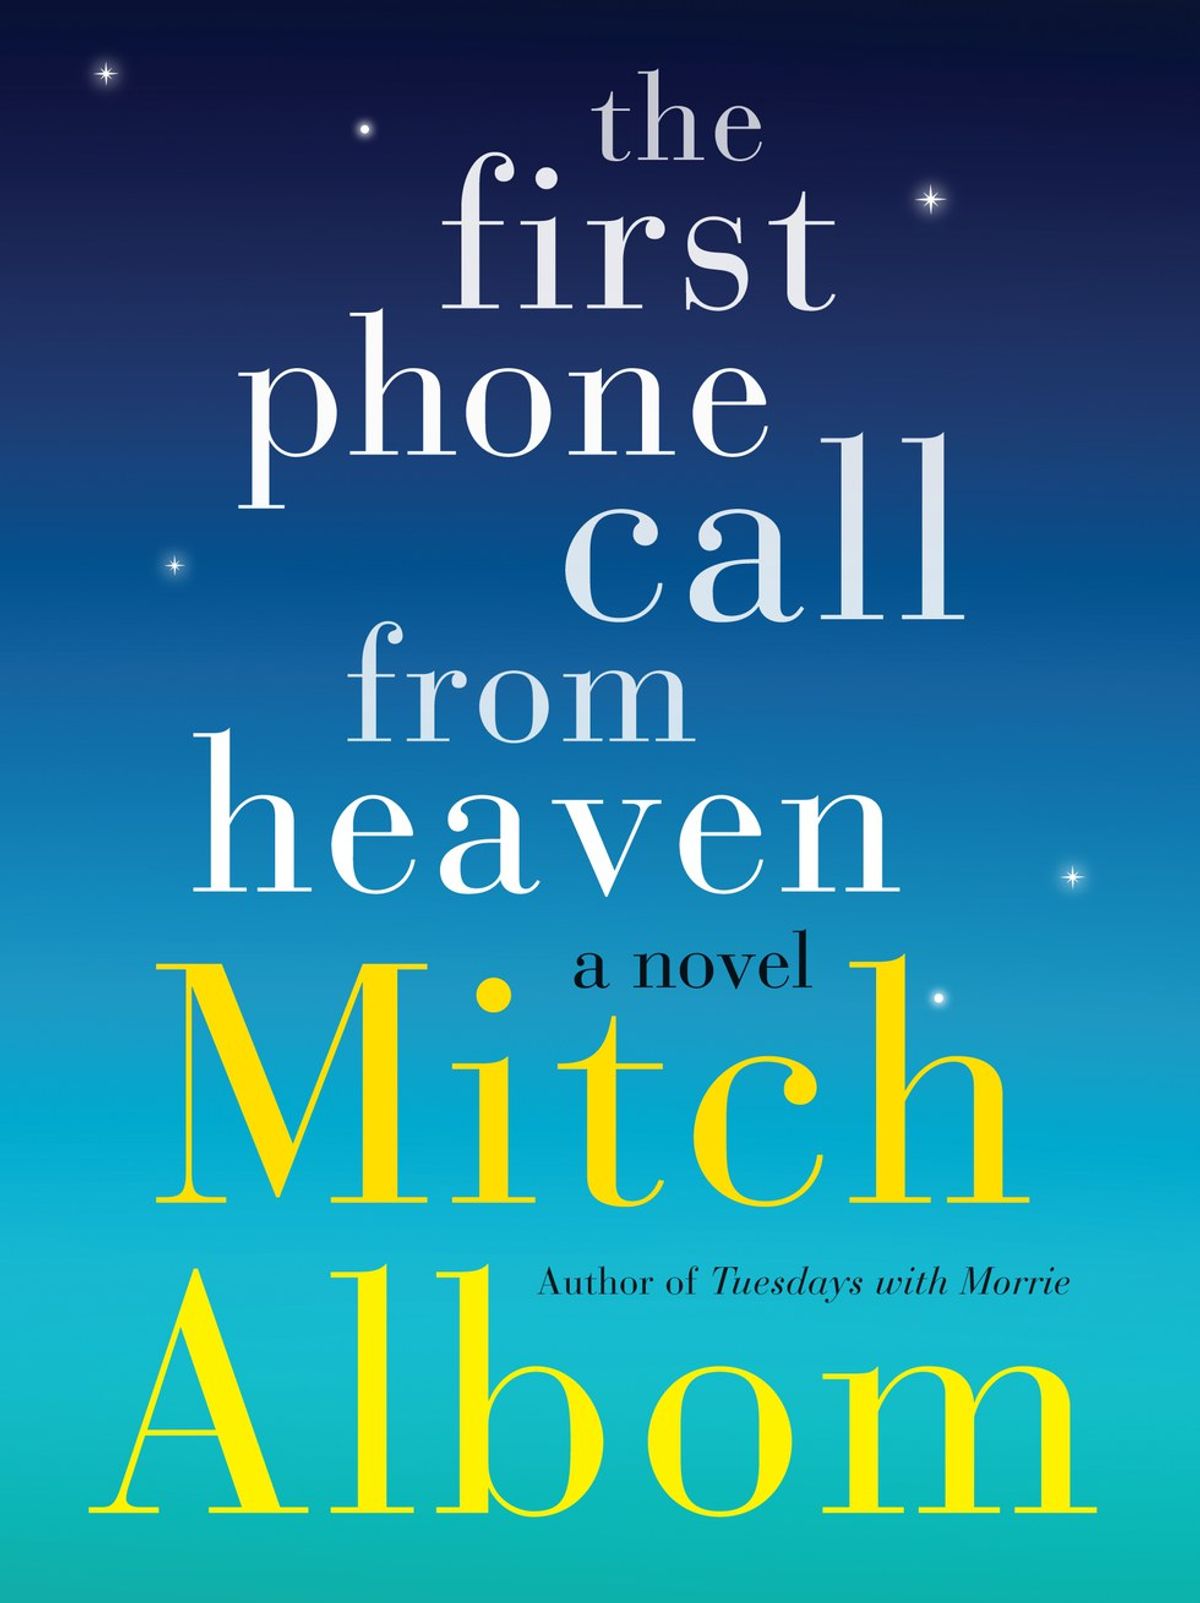 Book Review: Why I Loved Mitch Albom's 'The First Phone Call From Heaven'